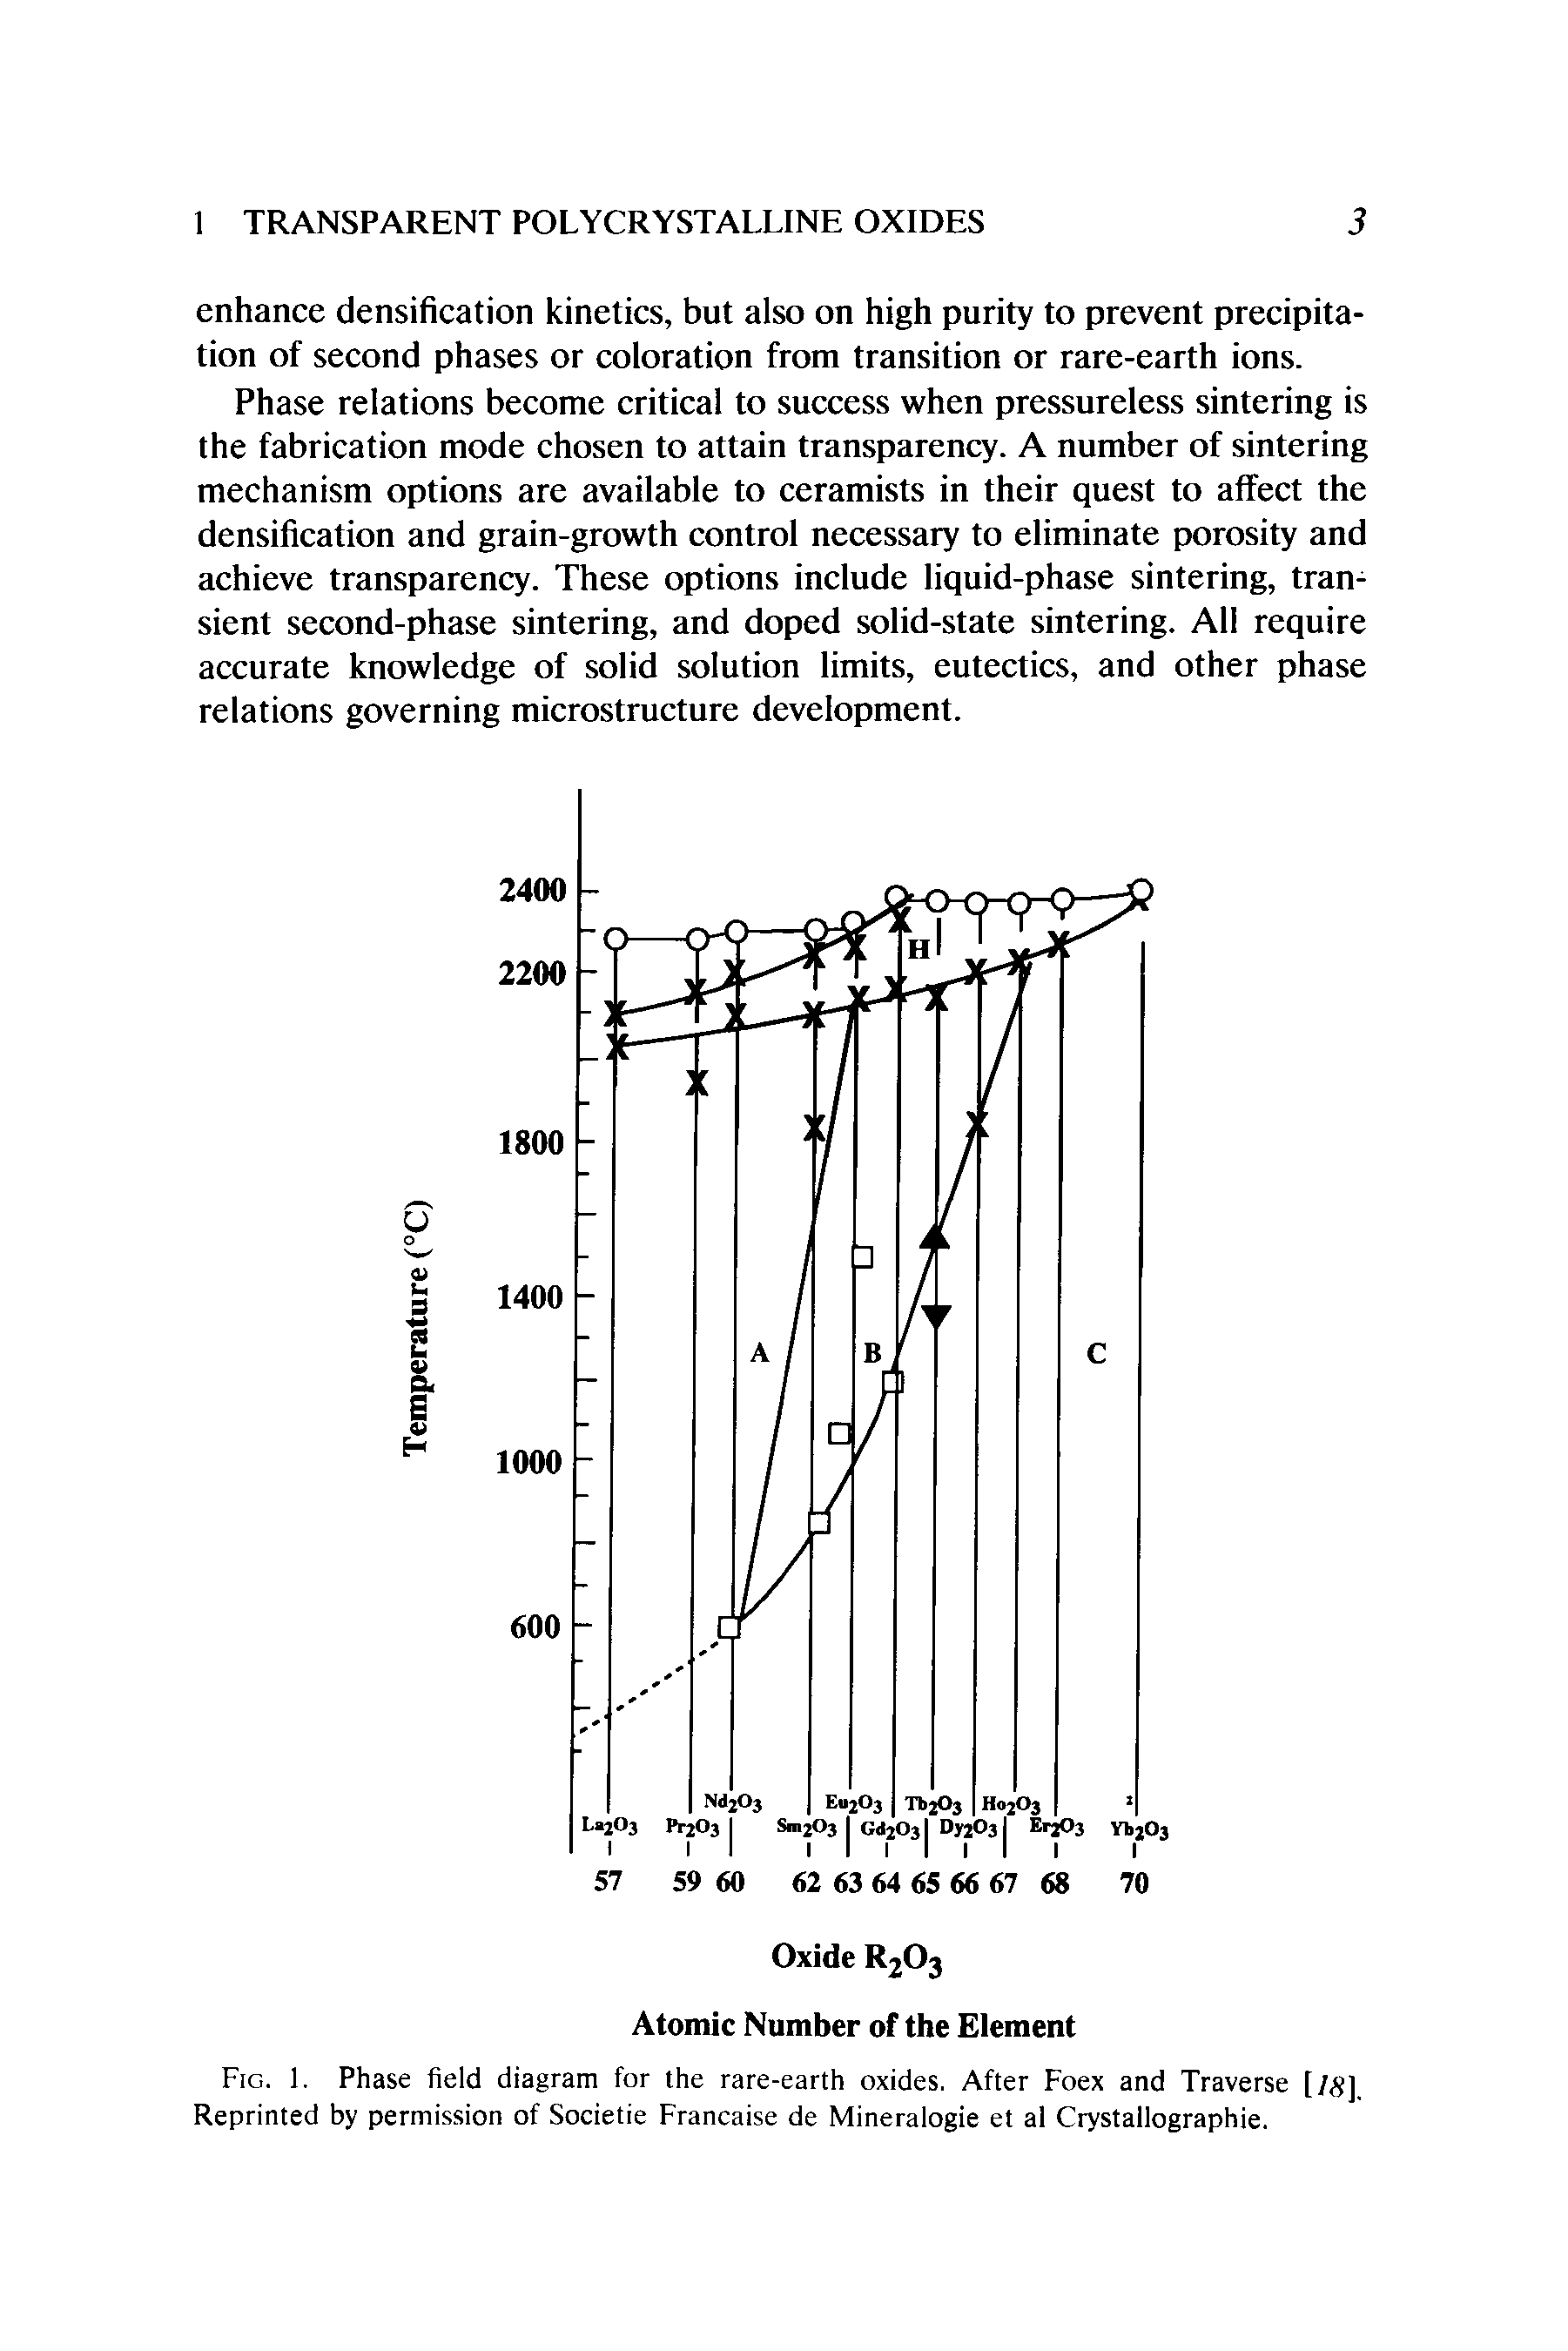 Fig. 1. Phase field diagram for the rare-earth oxides. After Foex and Traverse [/ ] Reprinted by permission of Societie Francaise de Mineralogie et al Crystallographie.